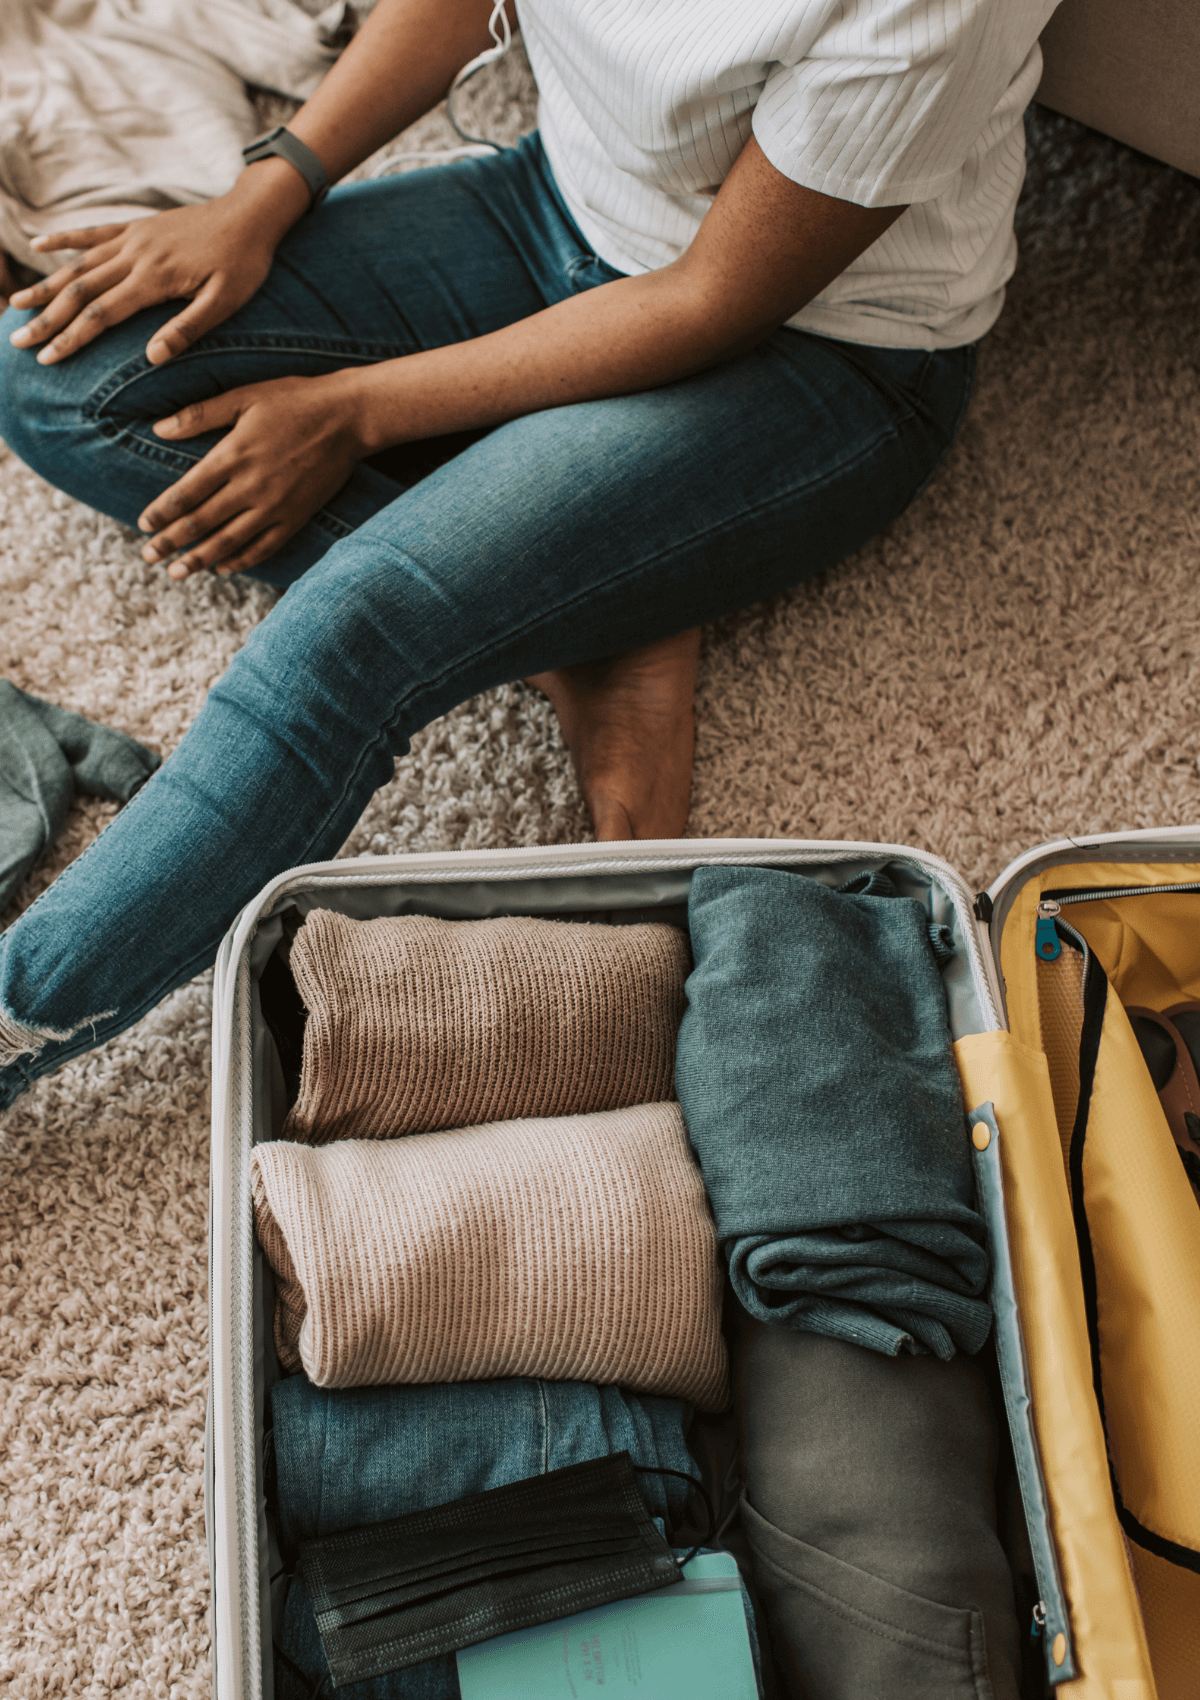 Packing clothes for a trip, minimalist packing